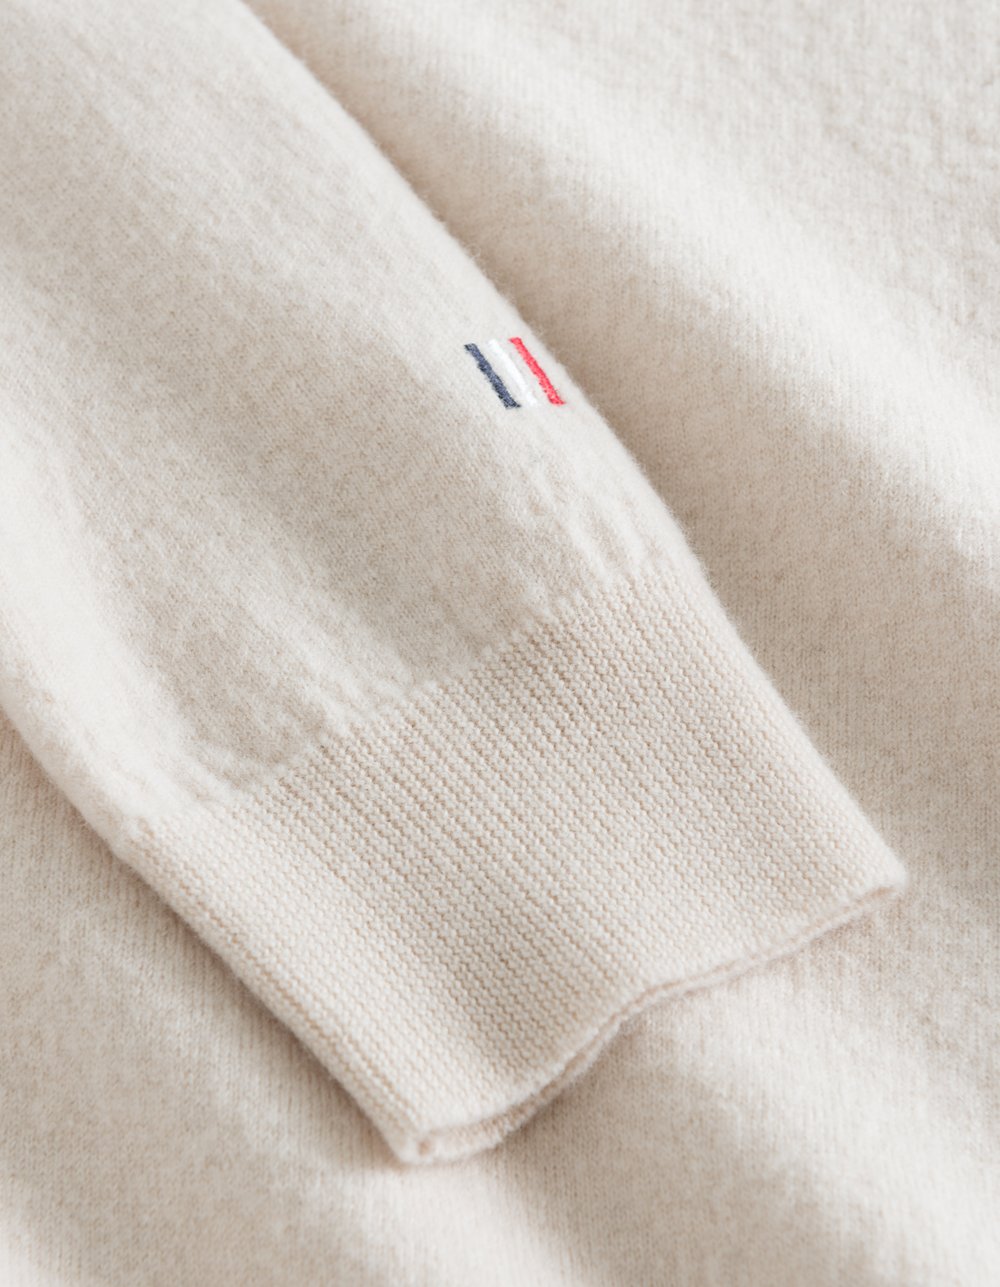 ETHAN WOOL KNIT - IVORY